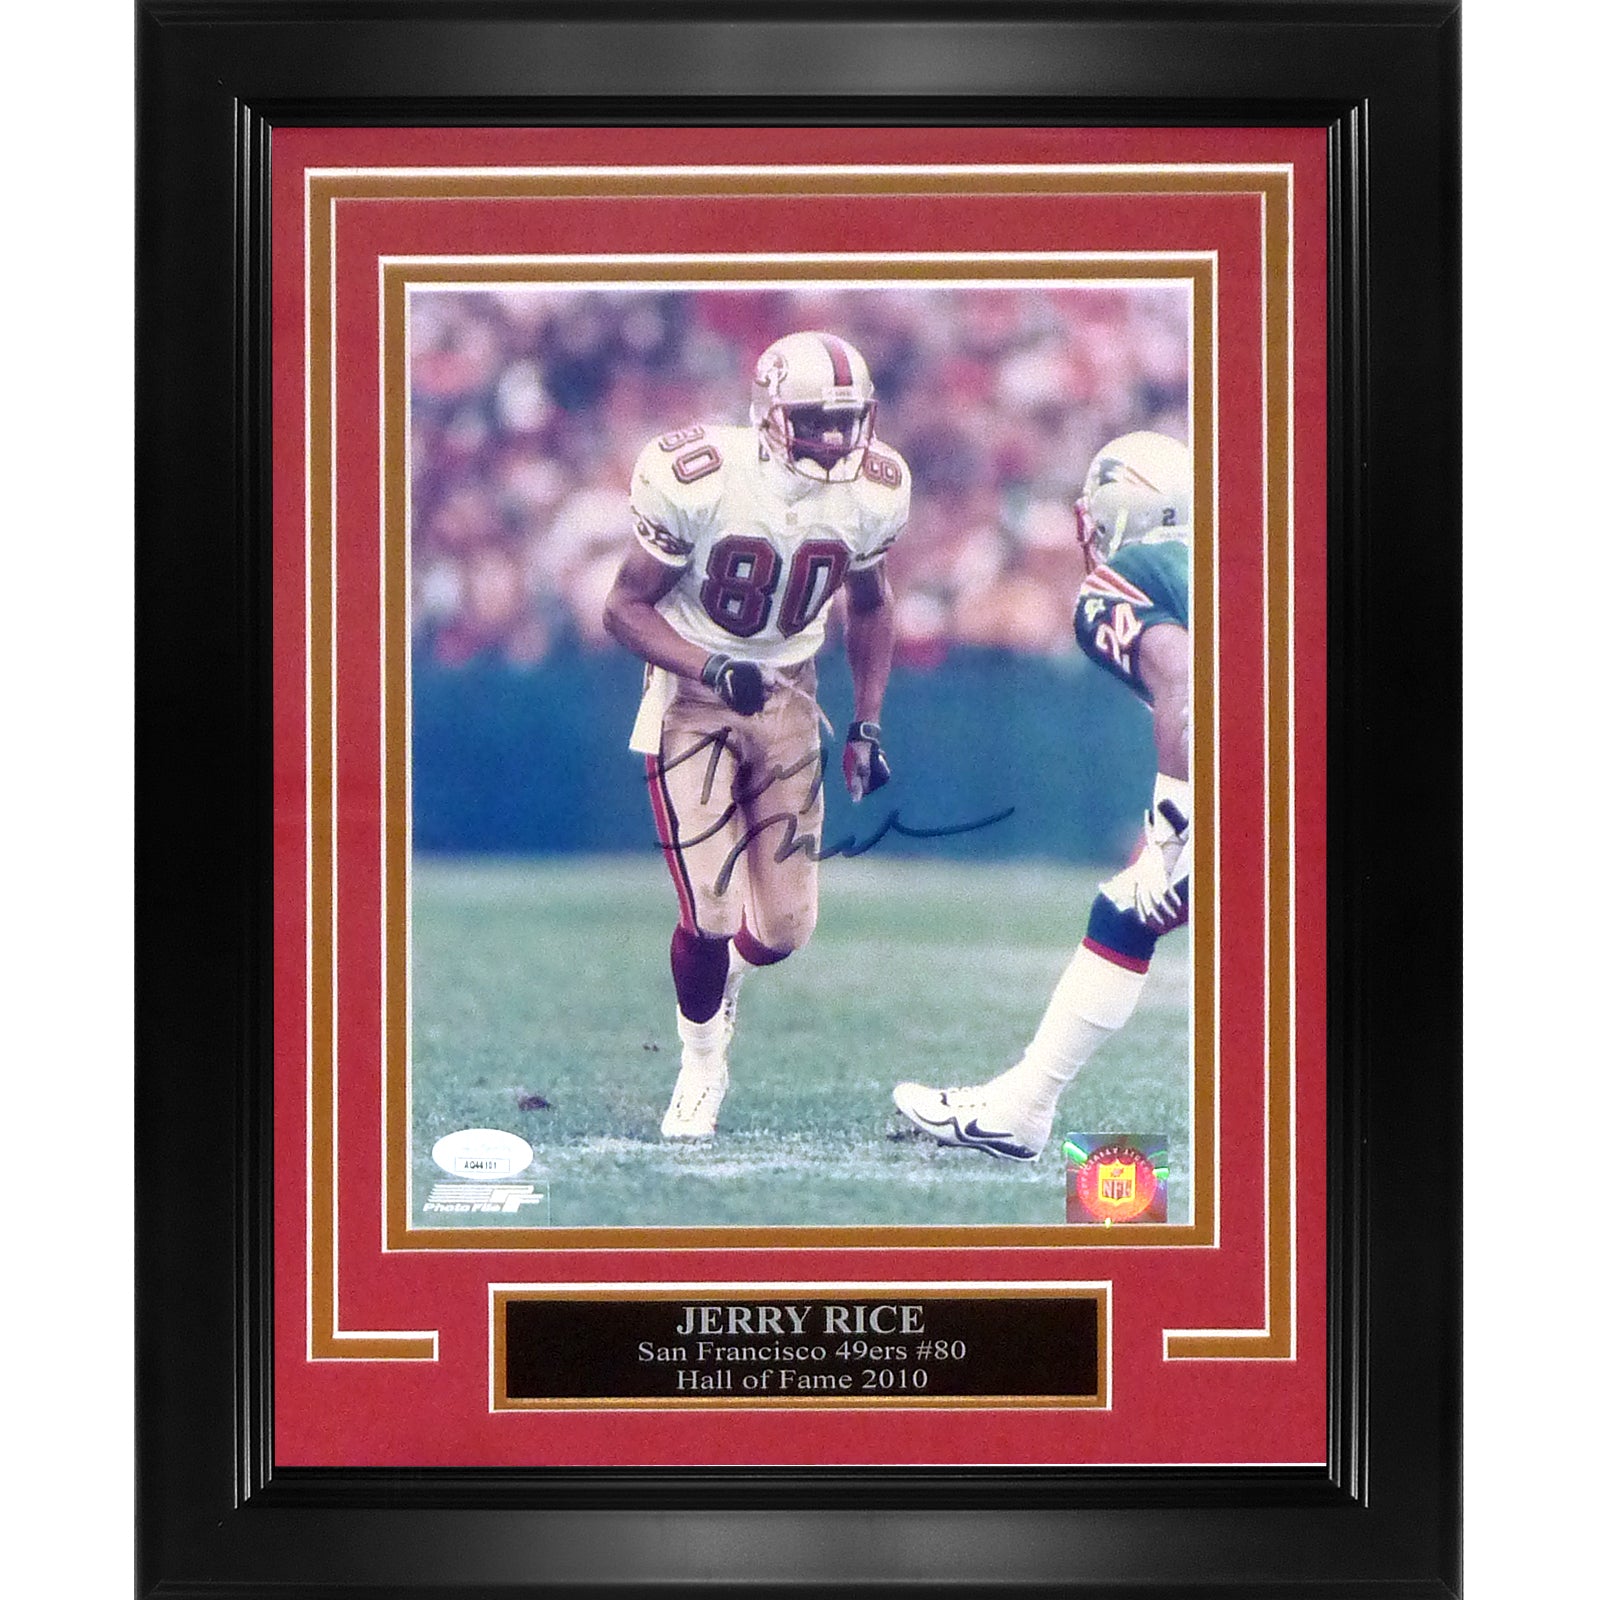 Jerry Rice Autographed San Francisco 49ers Deluxe Framed 8x10 Photo - JSA